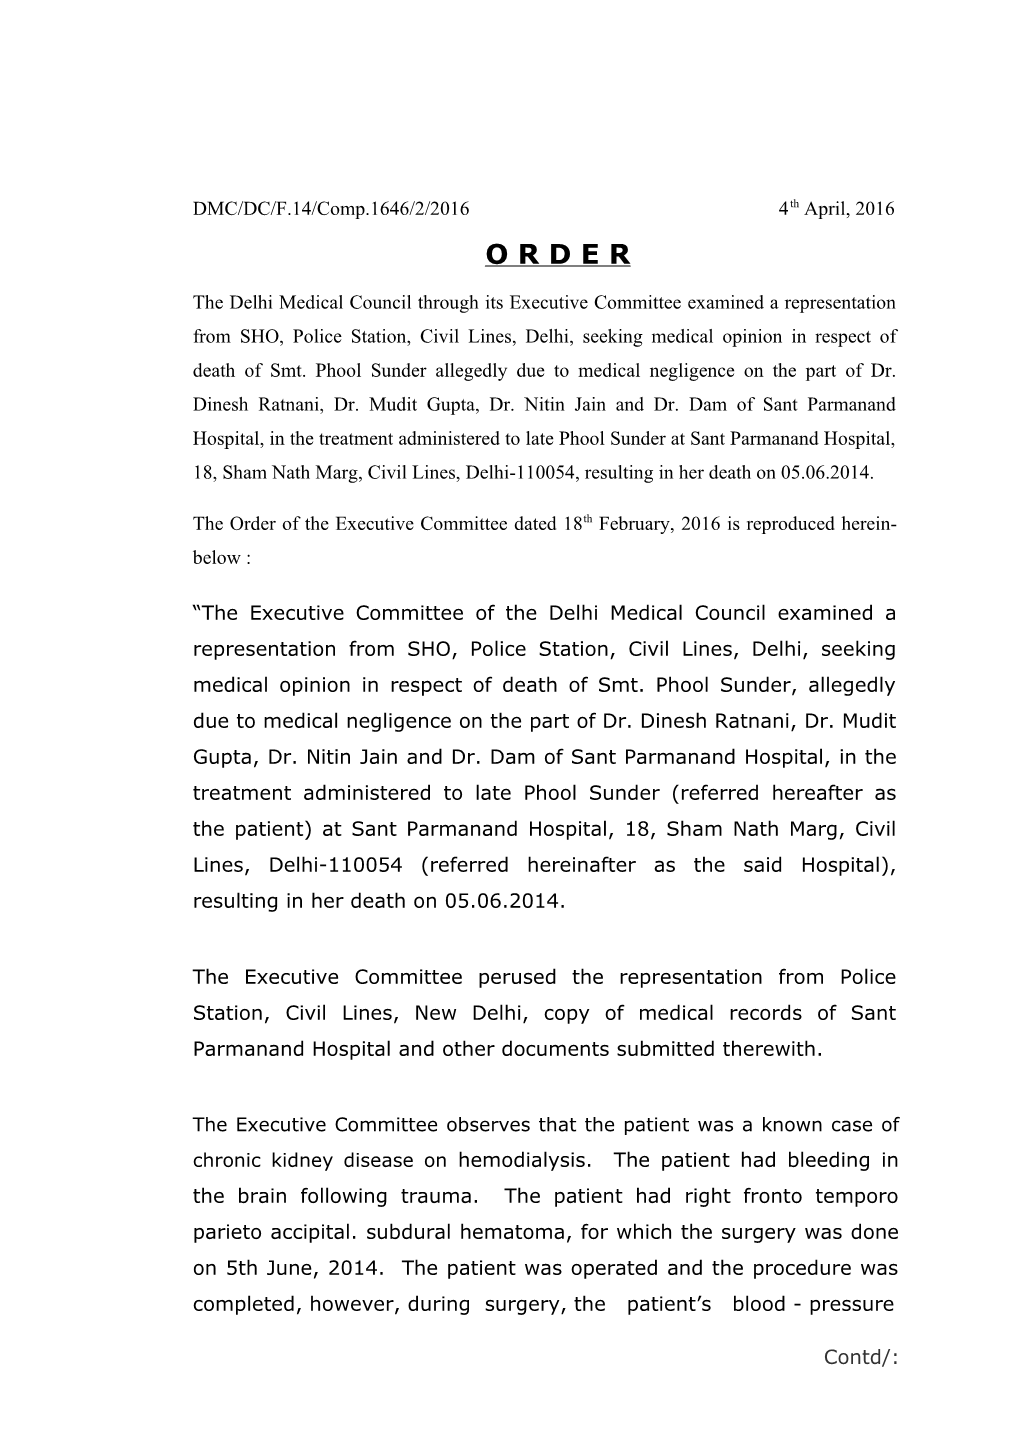 The Order of the Executive Committee Dated 18Thfebruary, 2016 Is Reproduced Herein-Below